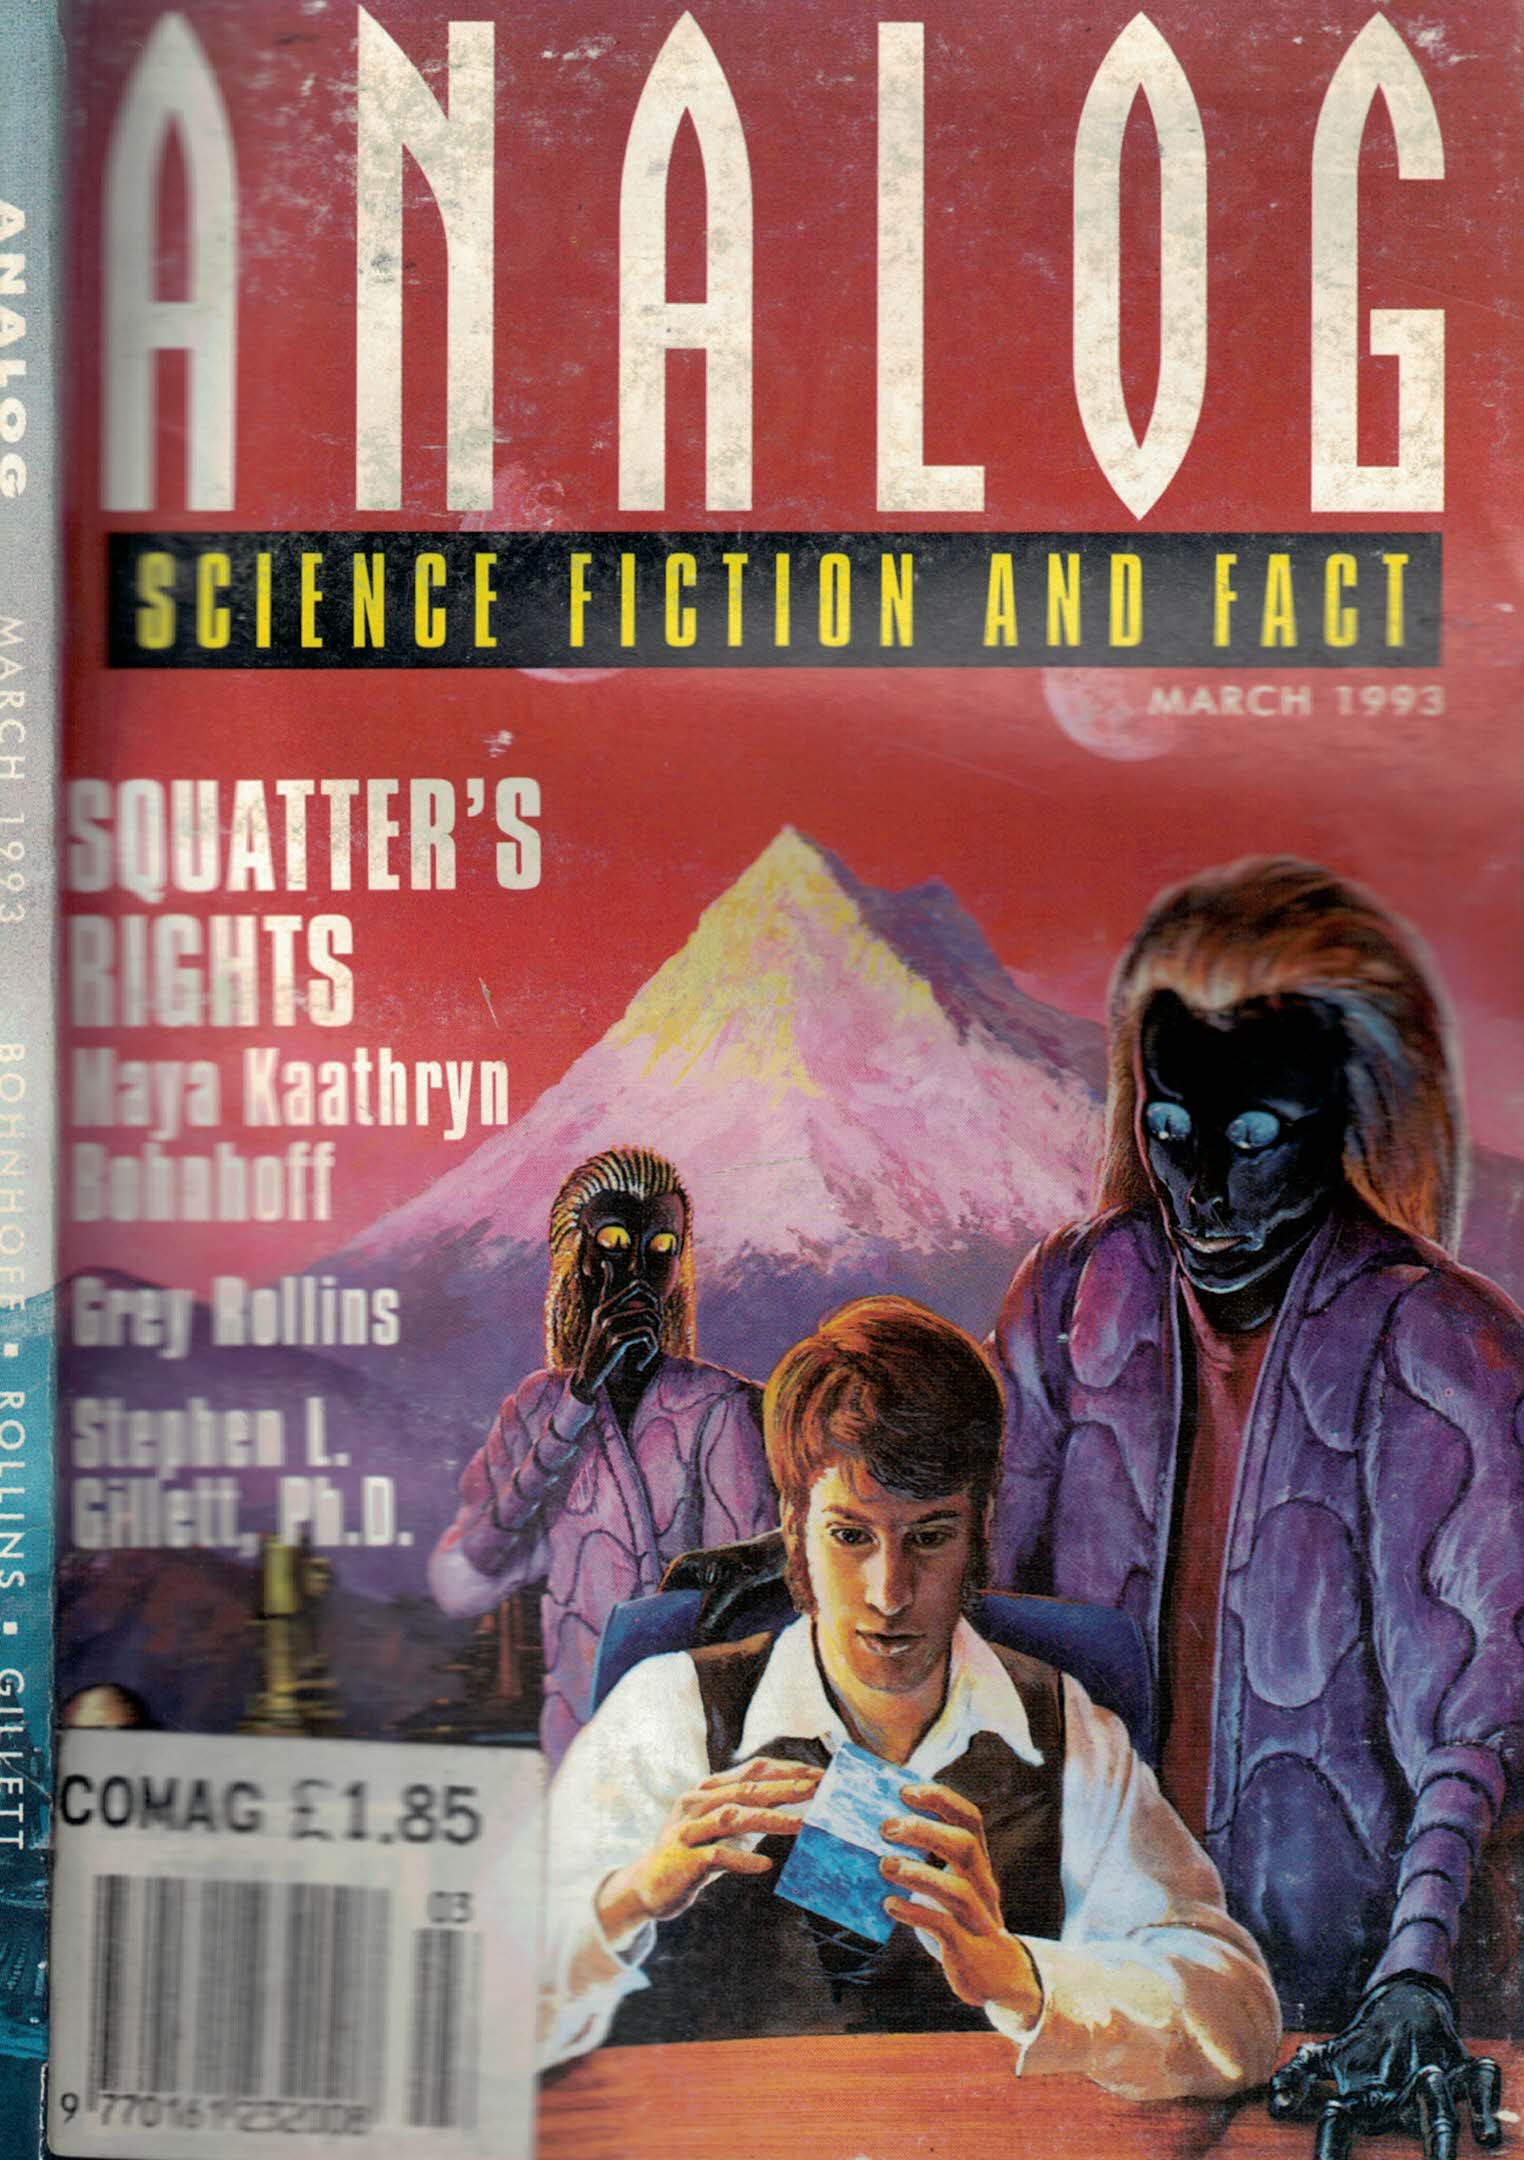 Analog. Science Fiction and Fact. Volume 113, Number 4. March 1993.